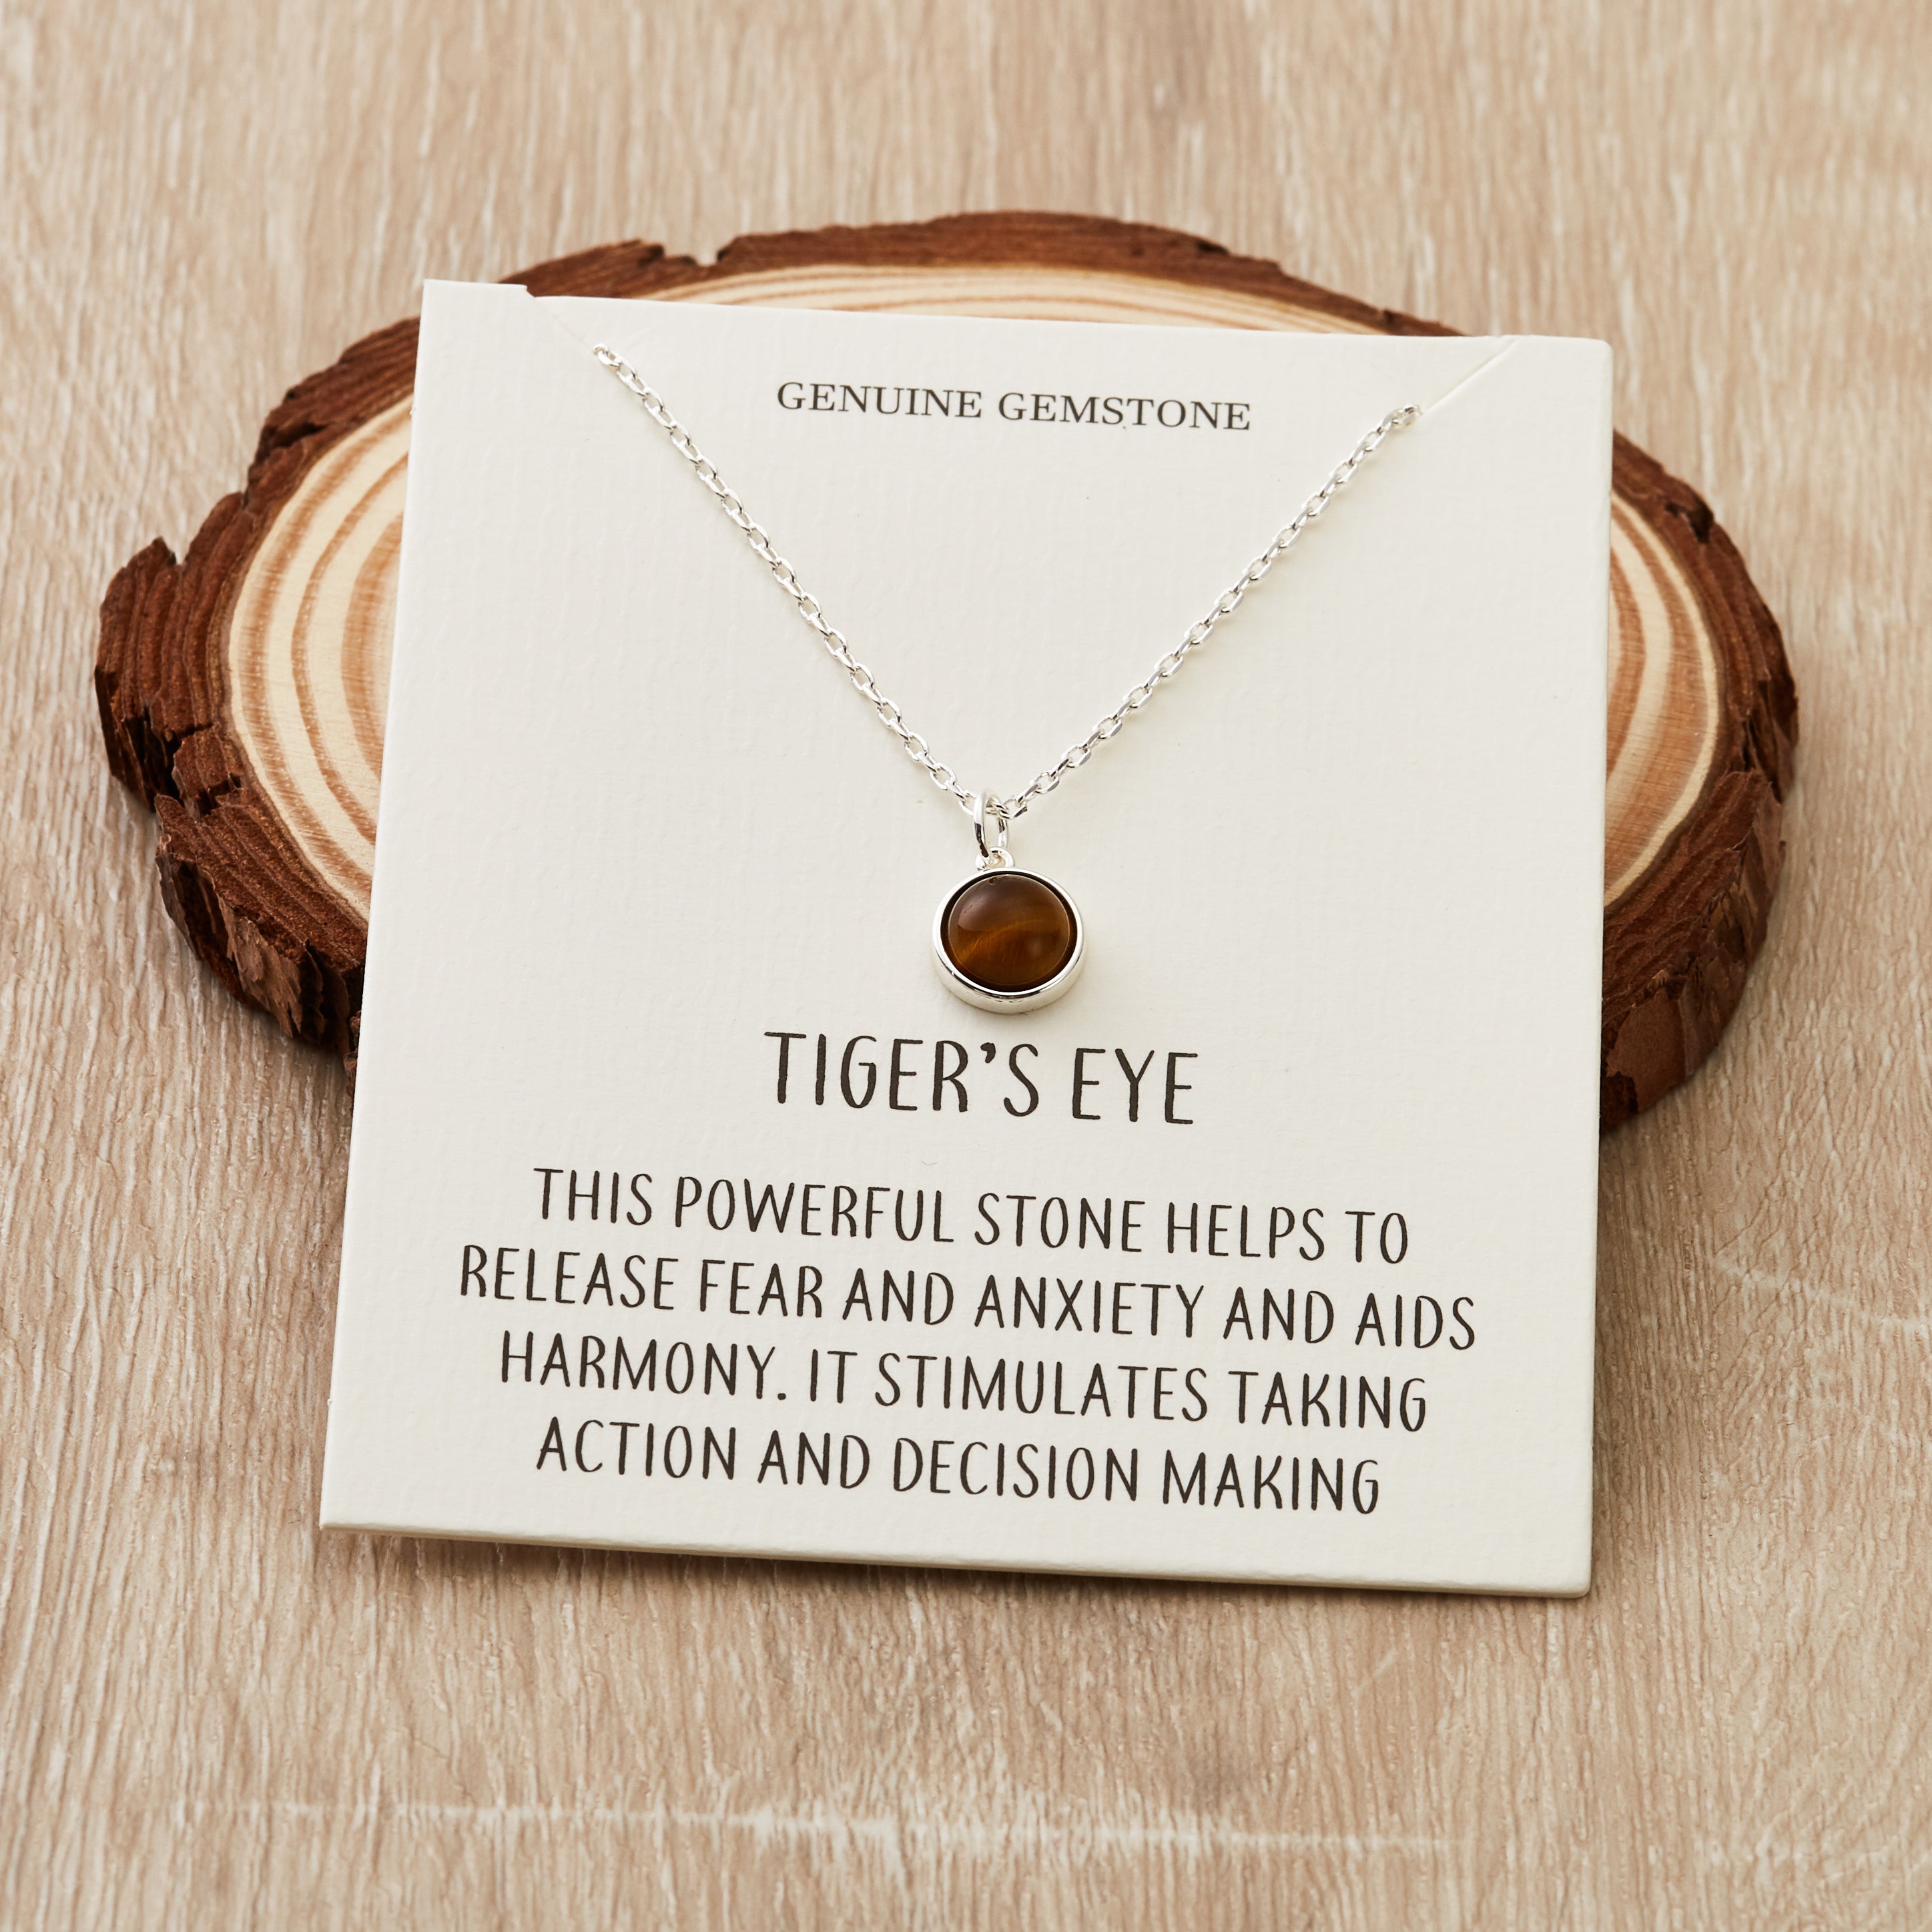 Tigers Eye Necklace with Quote Card